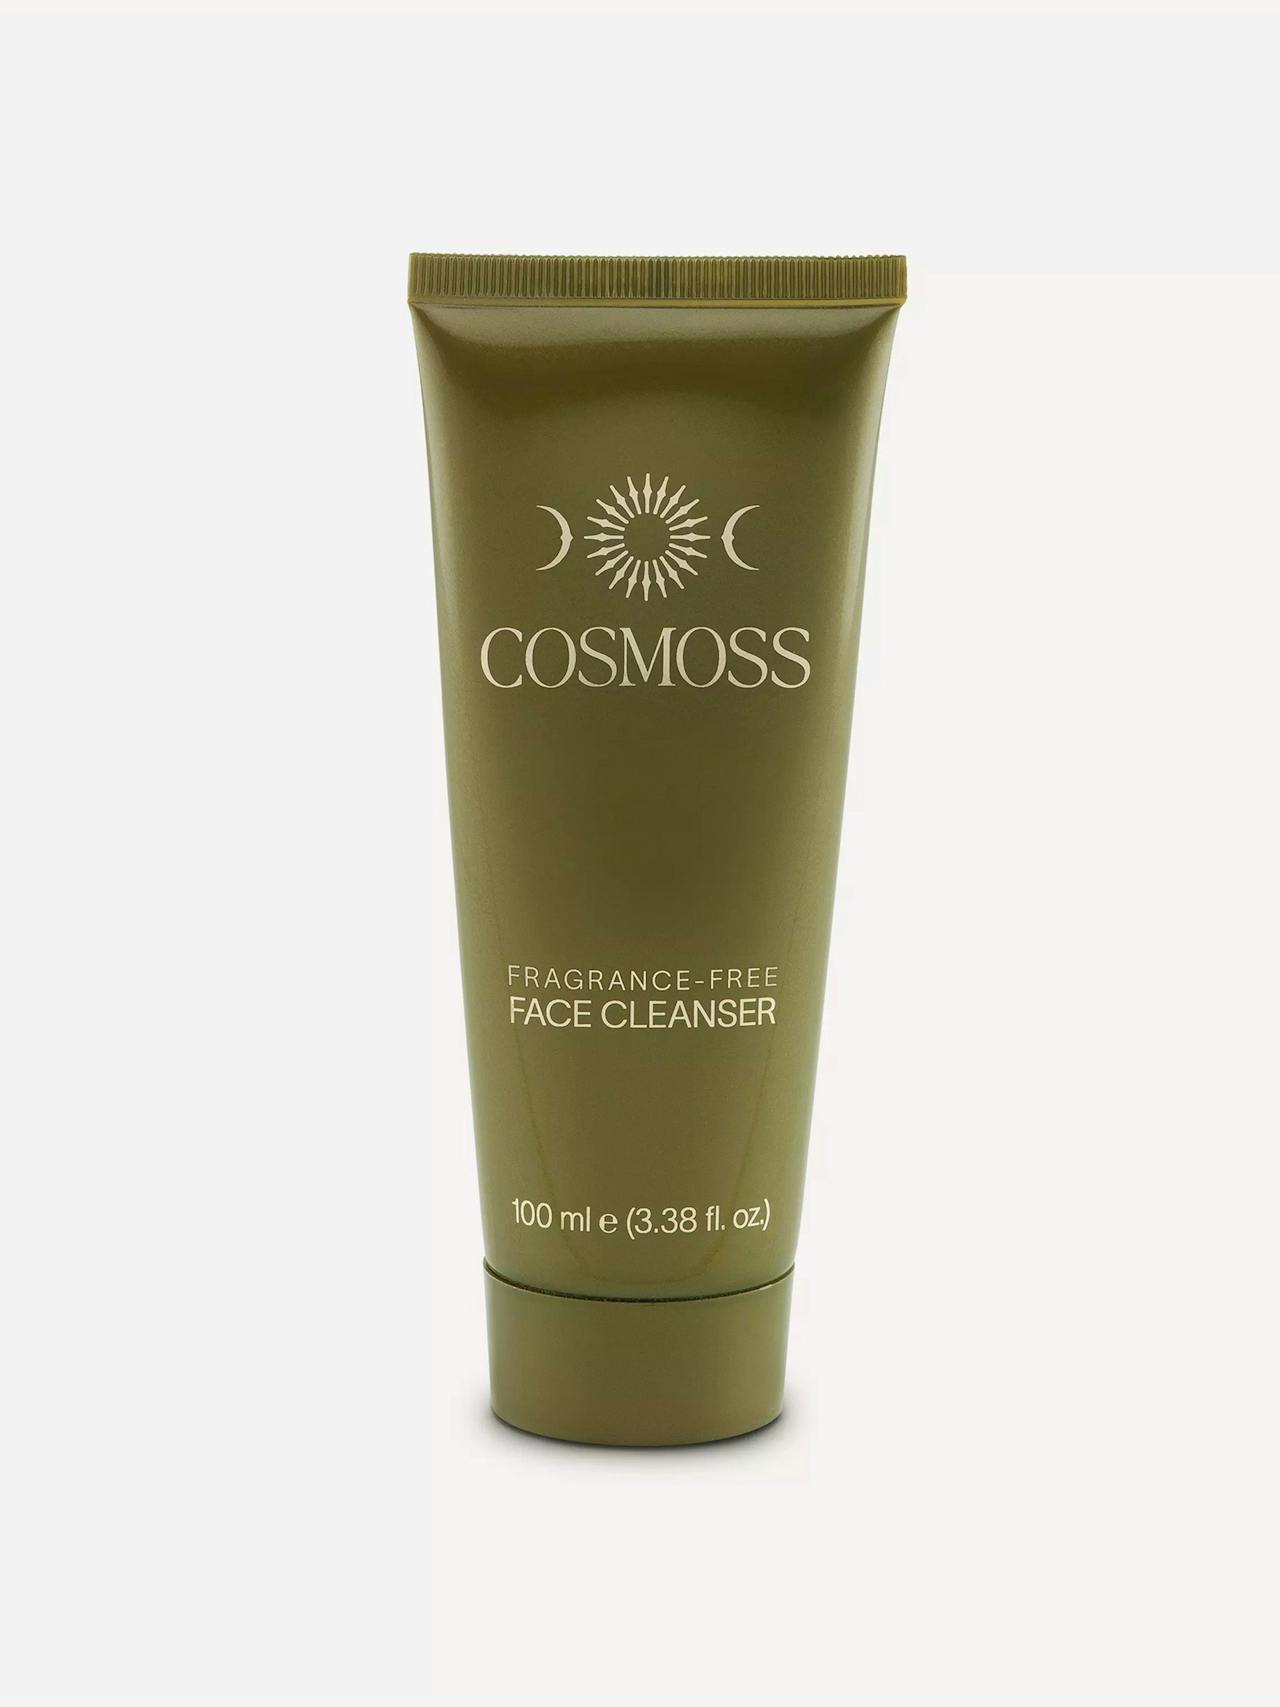 Face cleanser fragrance free